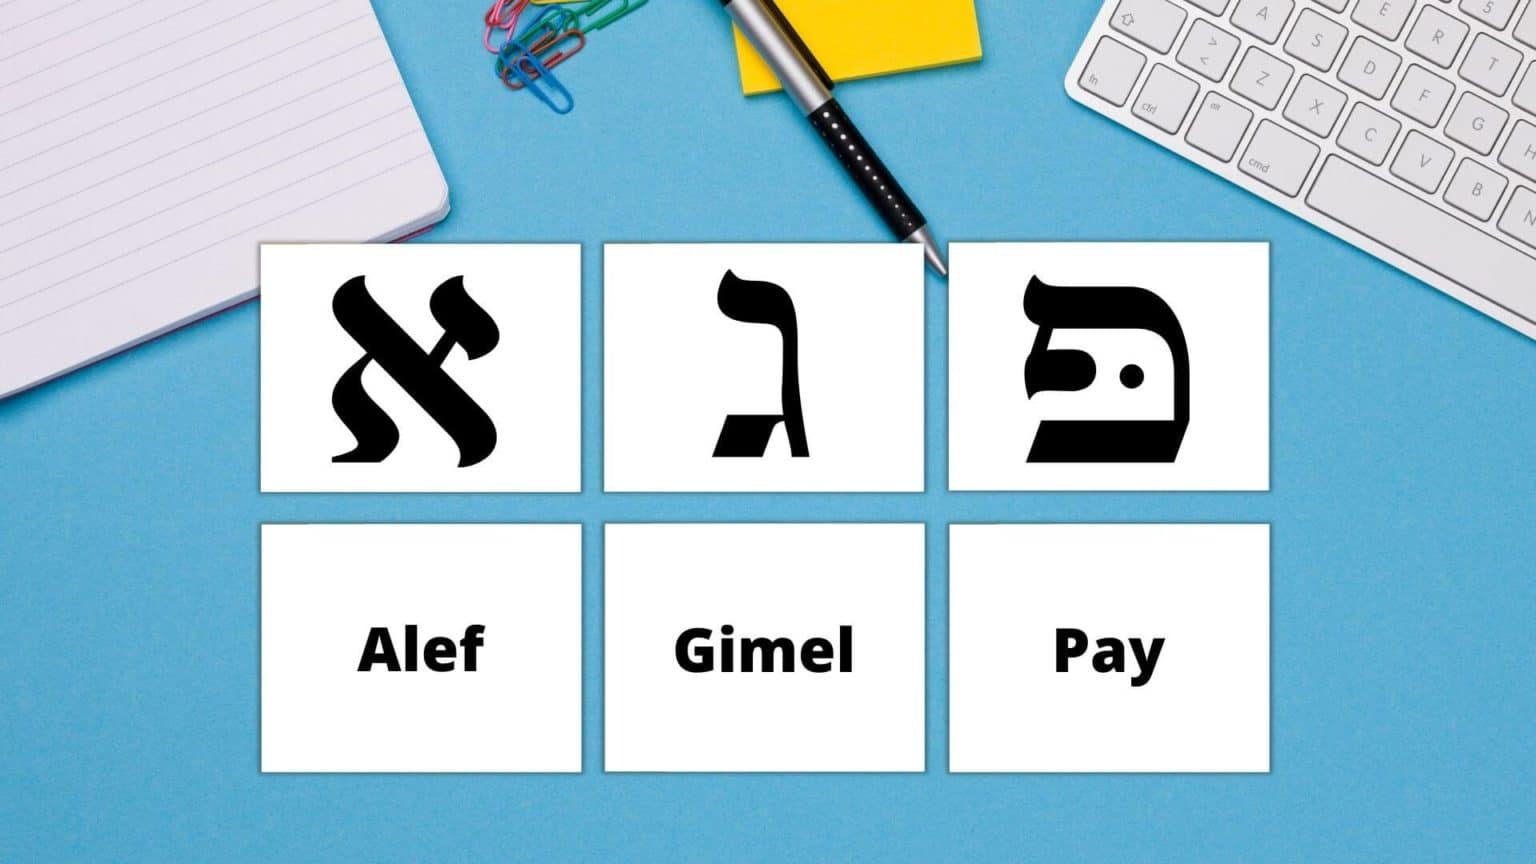 You MUST Use Hebrew Flashcards to Learn the Alphabet B'nai Mitzvah